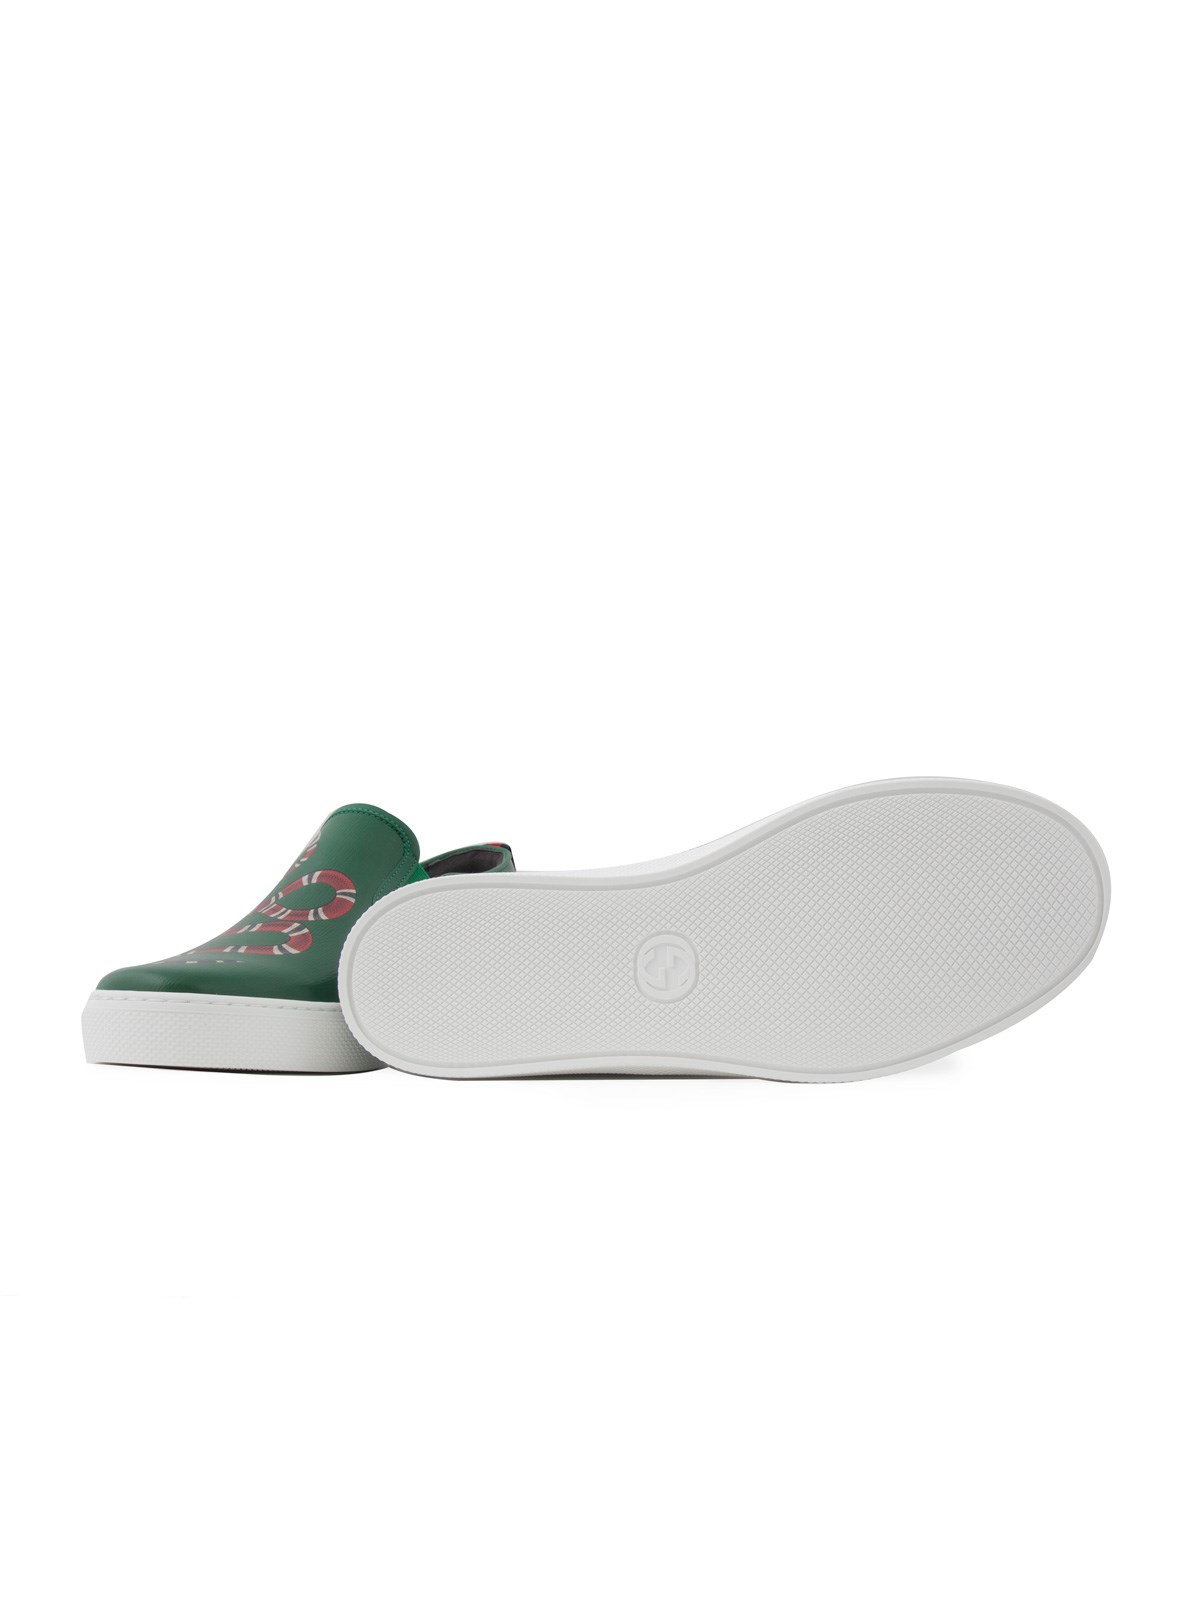 gucci SLIP ON SNEAKERS available on montiboutique.com - 21179